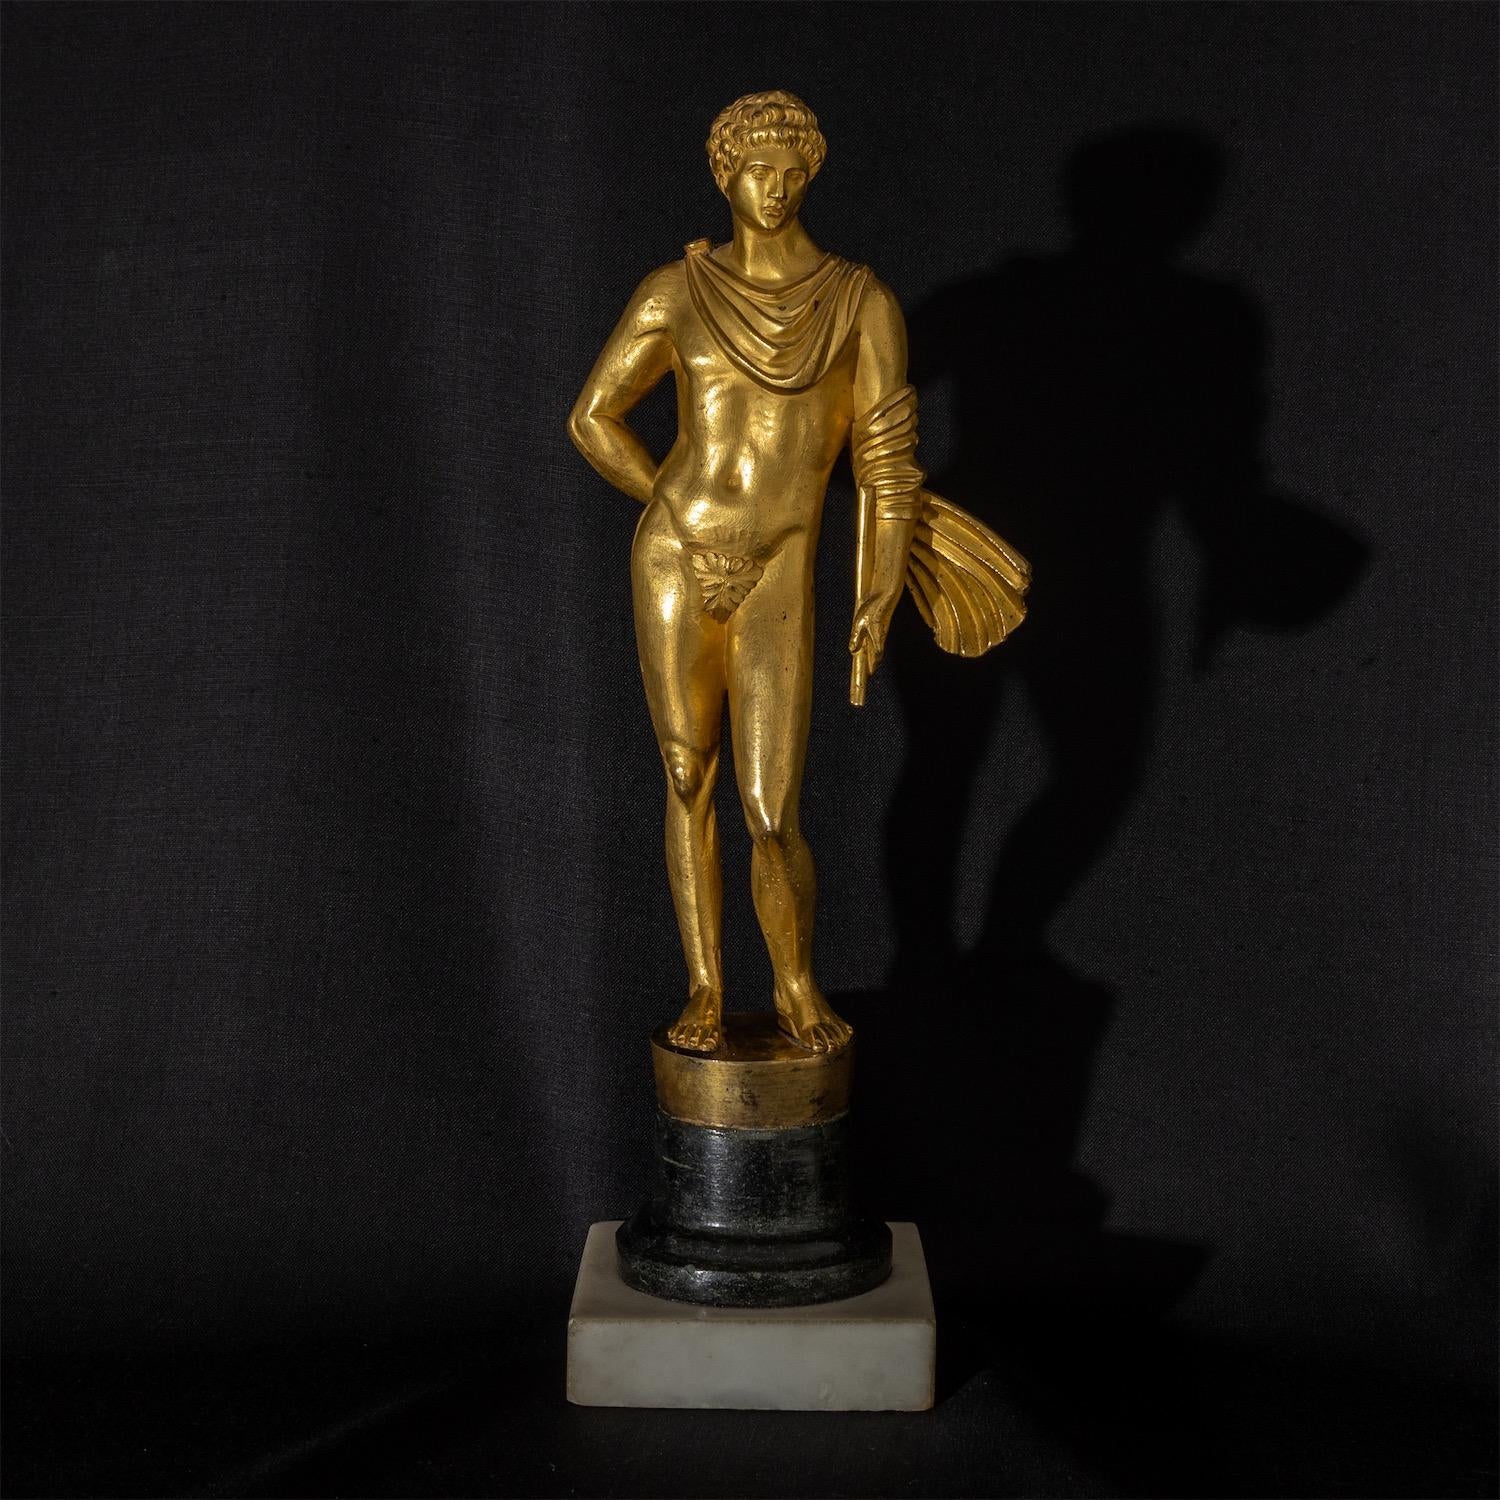 Gilt bronze of the Aetolian hero Meleager/Meleagros standing on a square marble plinth with a black round stone base. The cloak, strongly moved by the wind, wraps around his arm, in whose hand he still holds a lance broken in battle. After the